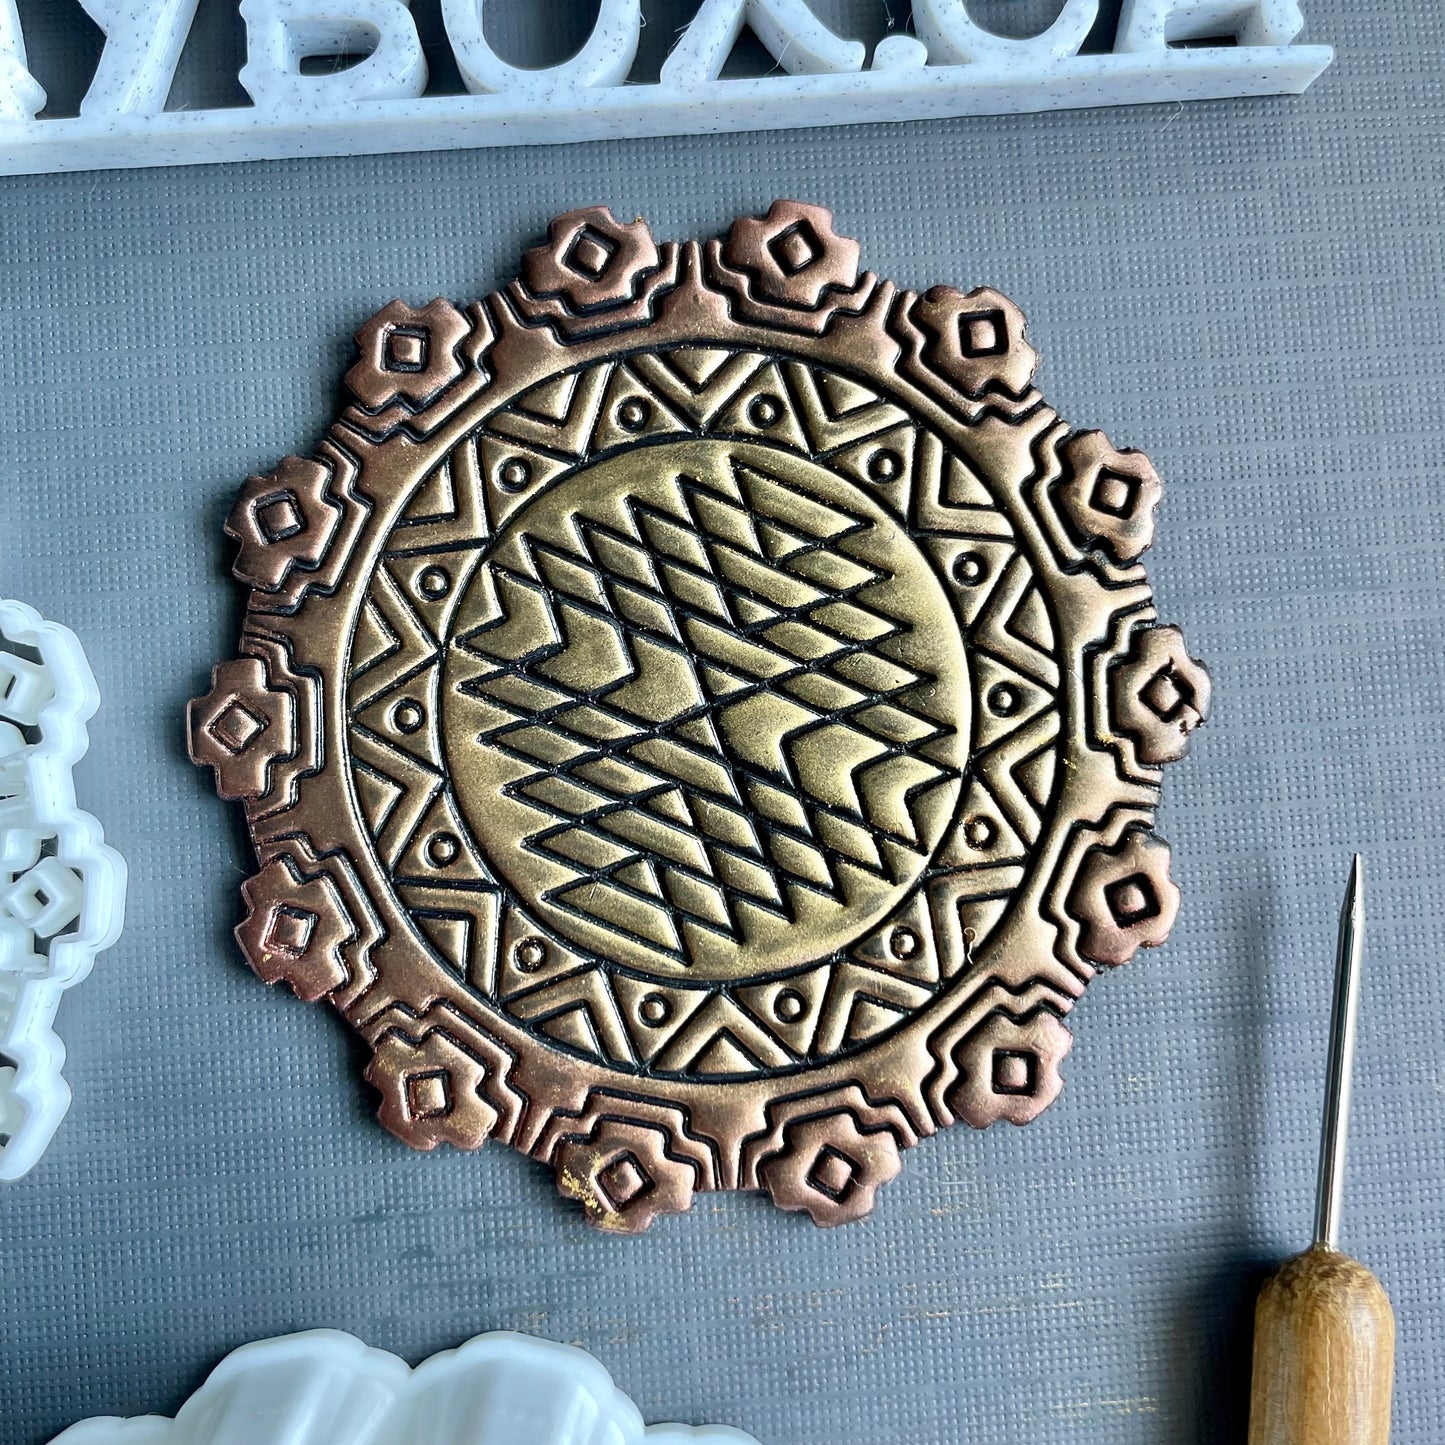 Aztec stamp and matching cutter - made for use with polymer clay